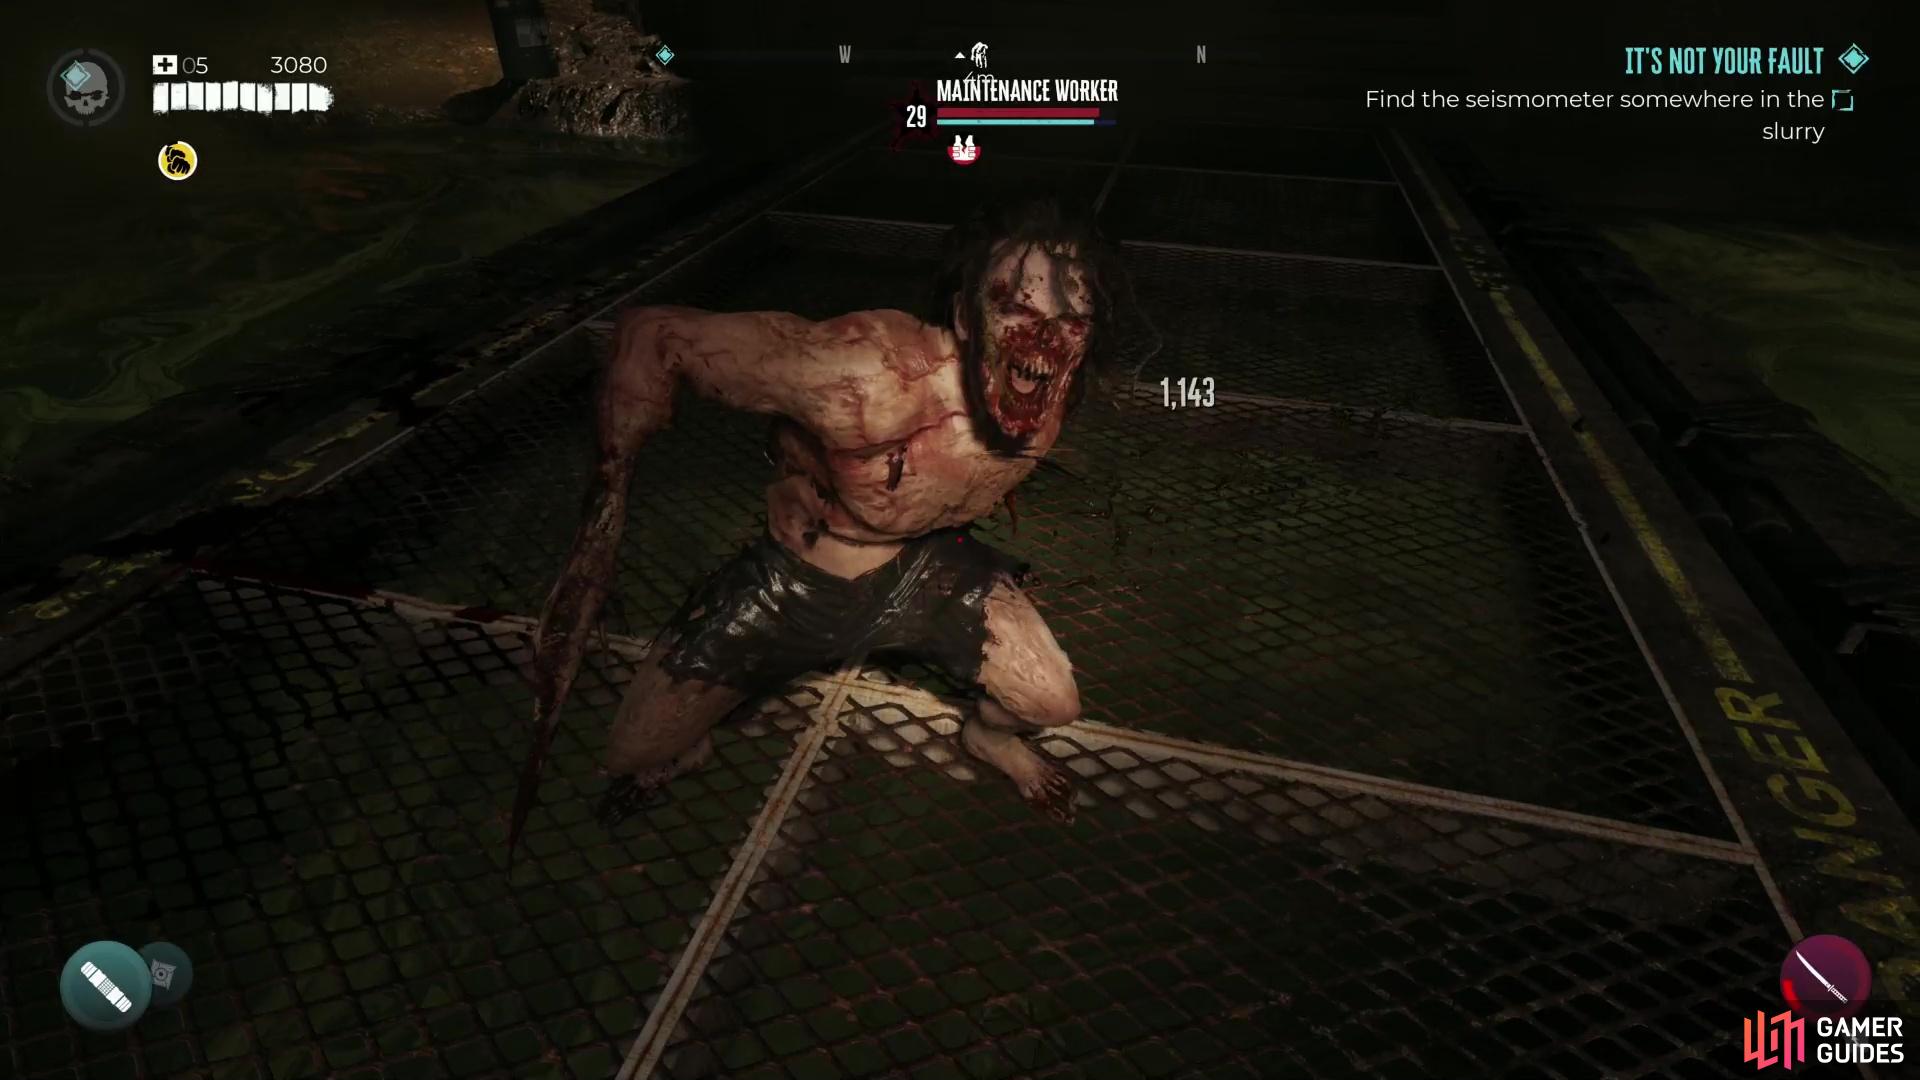 A Butcher in the Dead Island 2 sewer system.